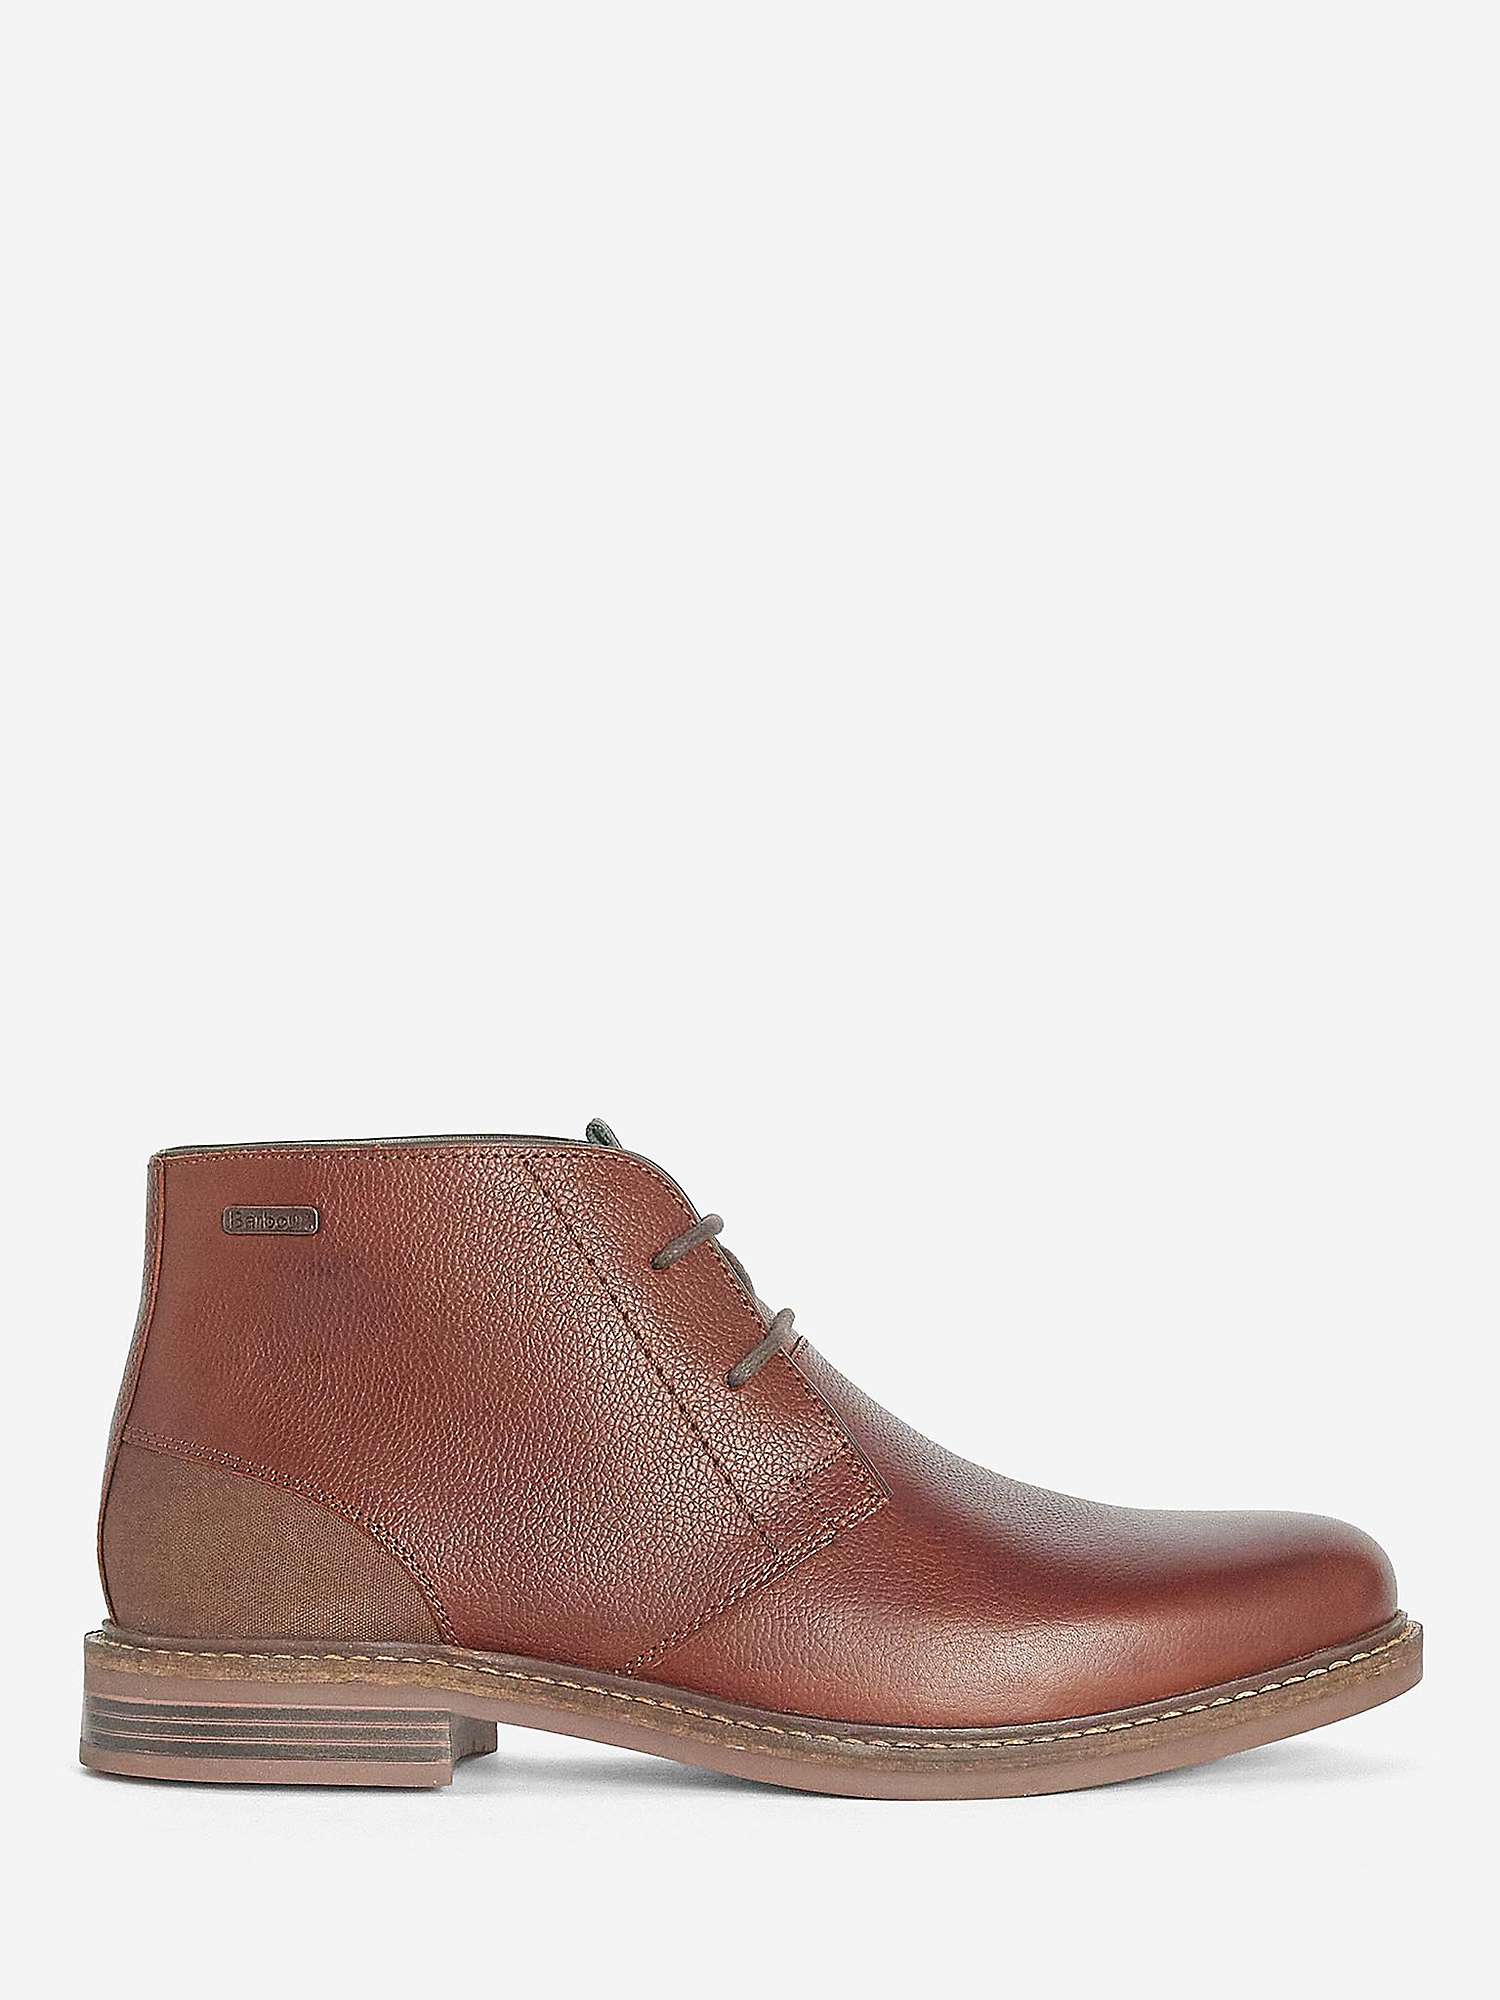 Barbour Redhead Suede Chukka Boots, Teak at John Lewis & Partners